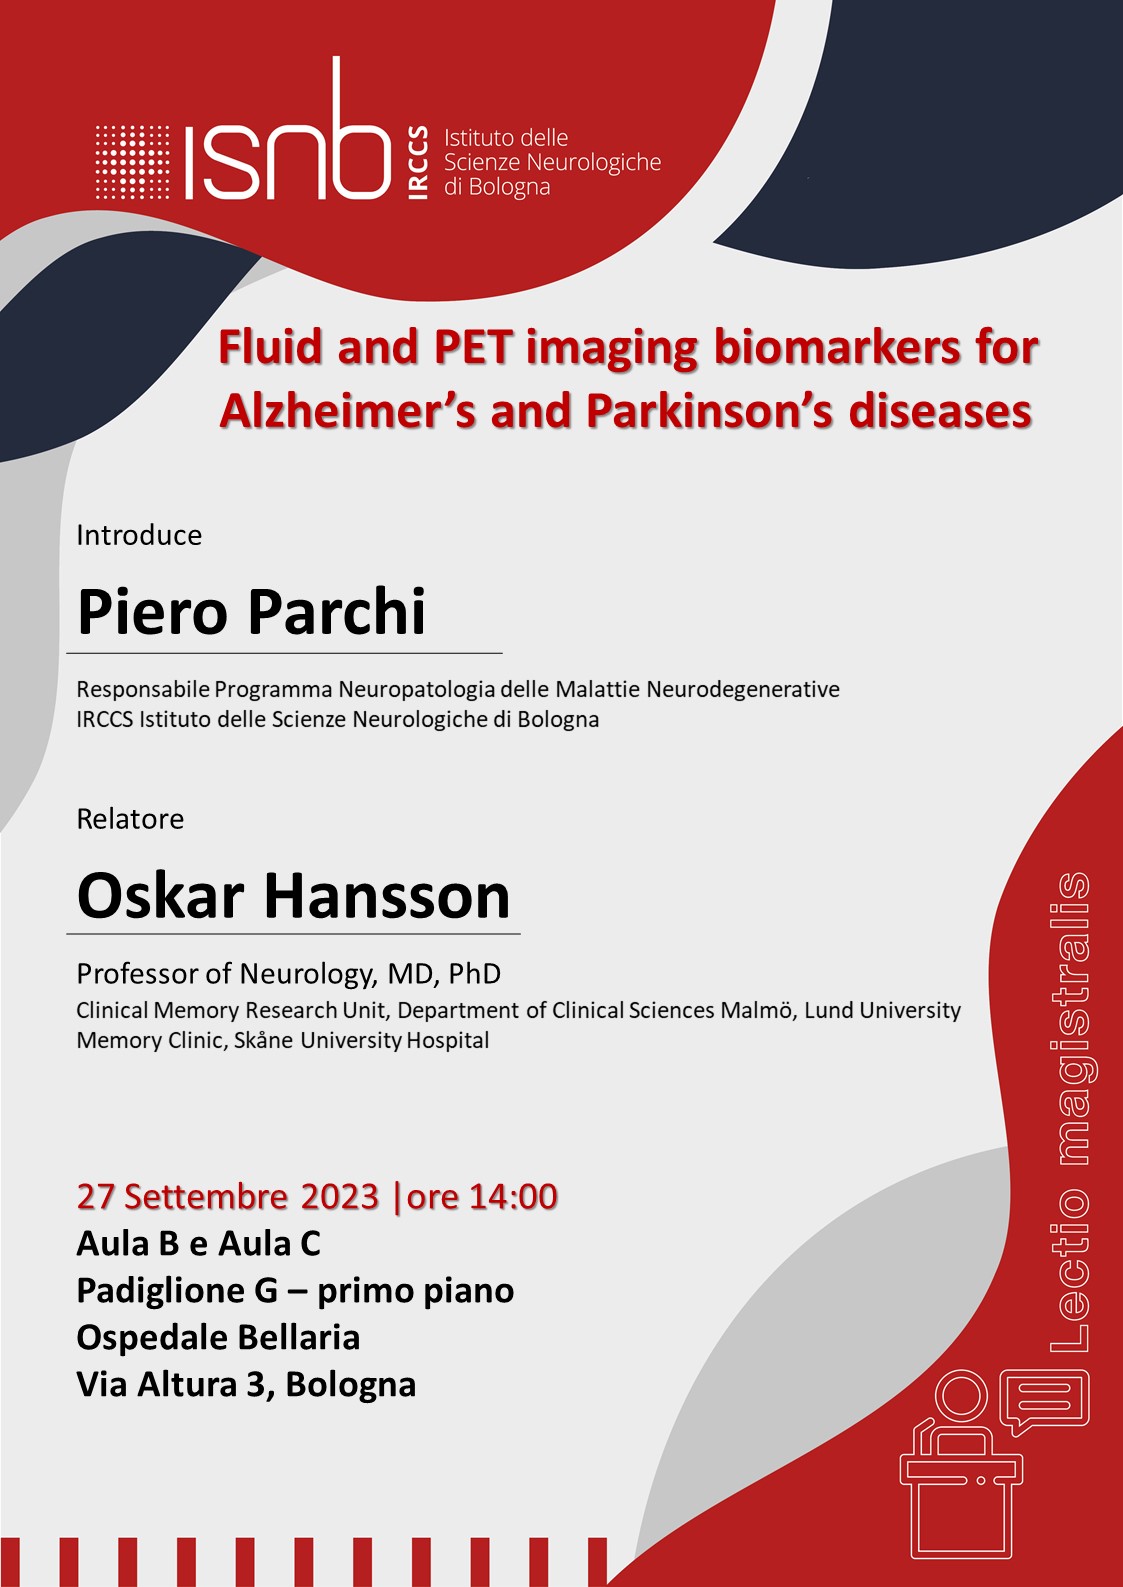 Fluid and PET imaging biomarkers for Alzheimer’s and Parkinson’s diseases